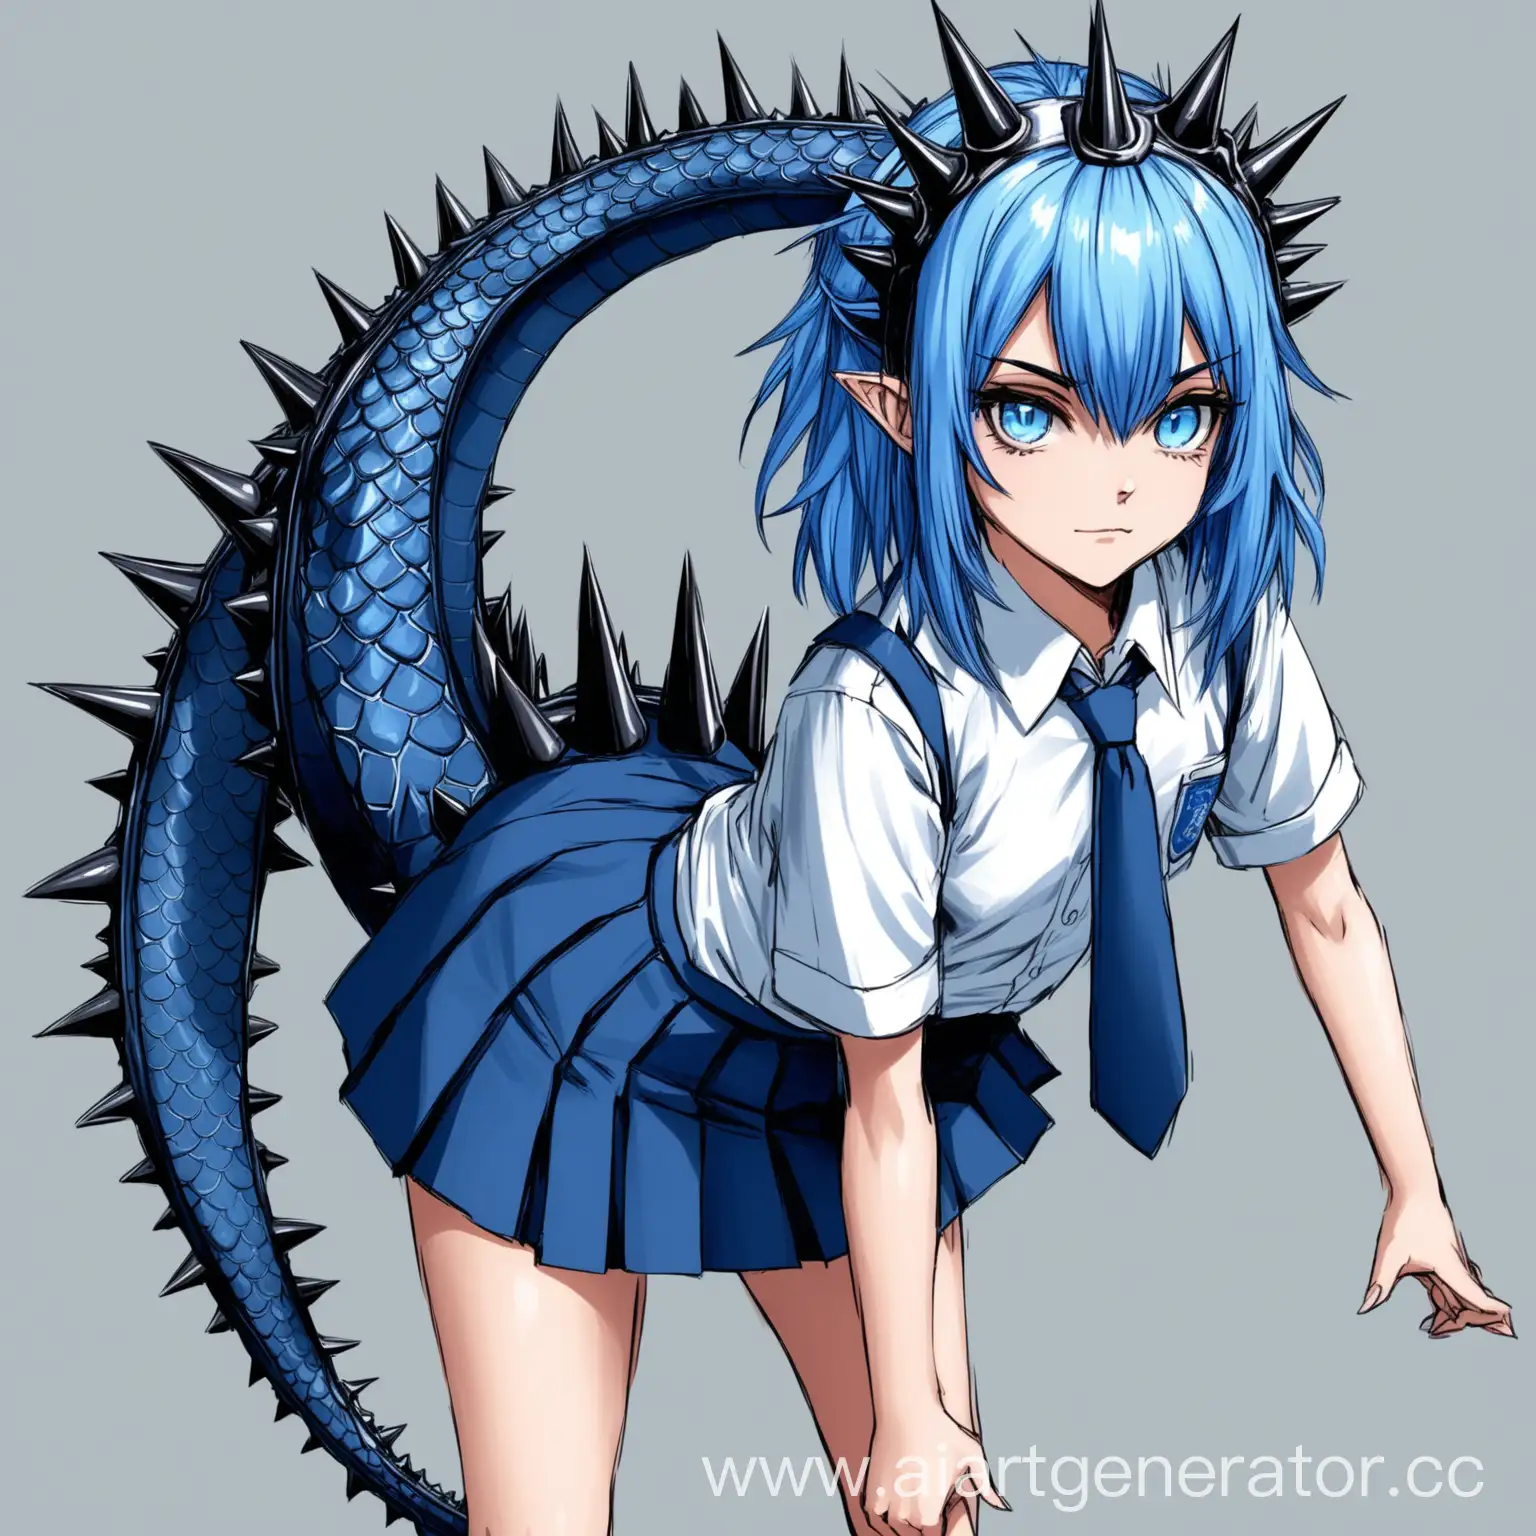 Art-Girl-with-Blue-Hair-Skirt-and-DragonInspired-Accessories